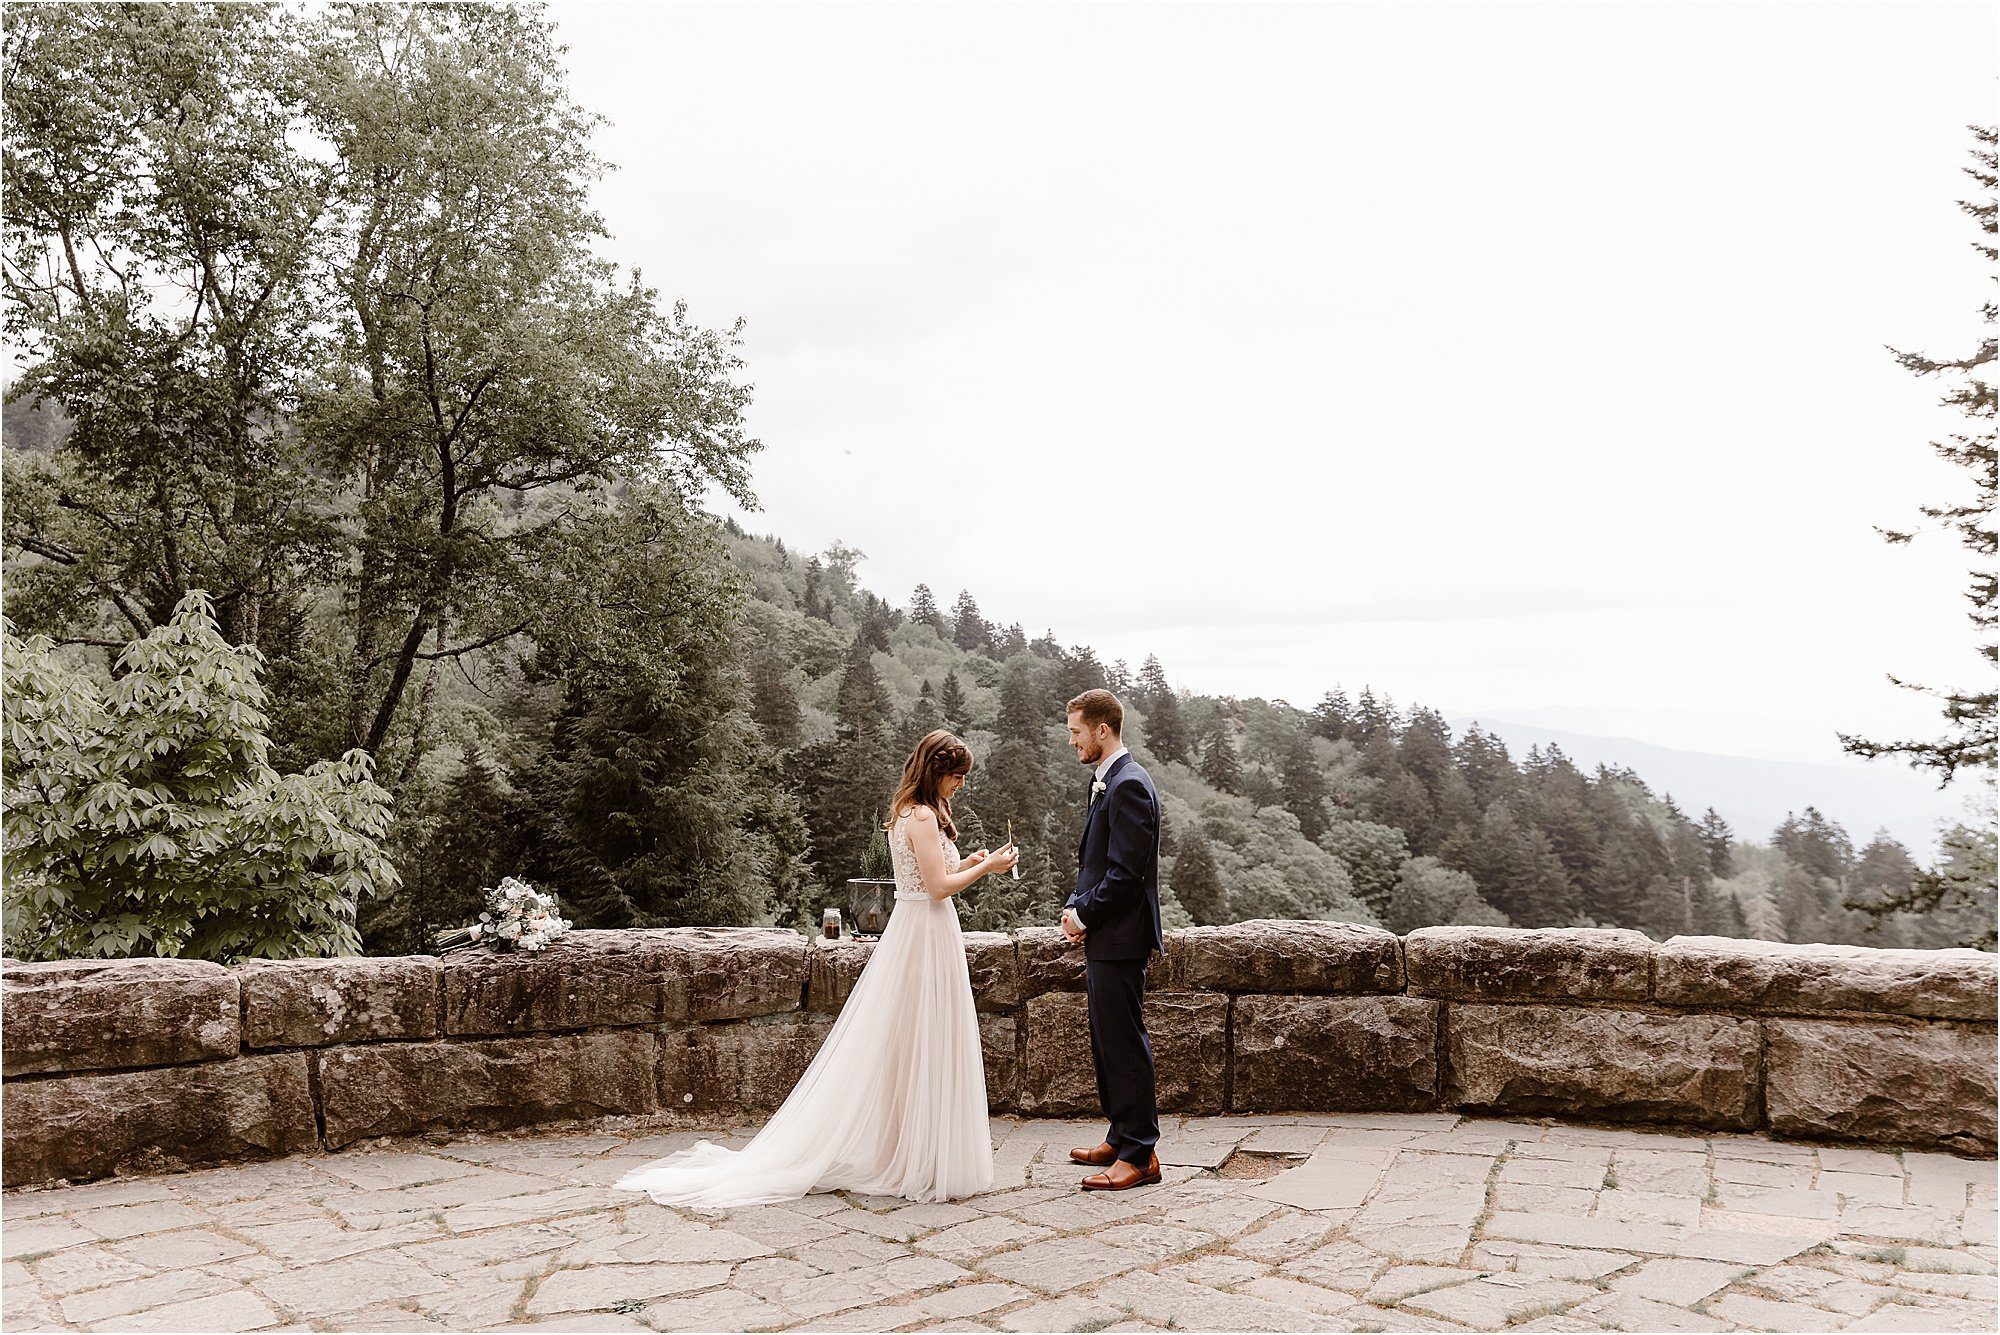 Intimate Newfound Gap Elopement in The Great Smoky Mountains